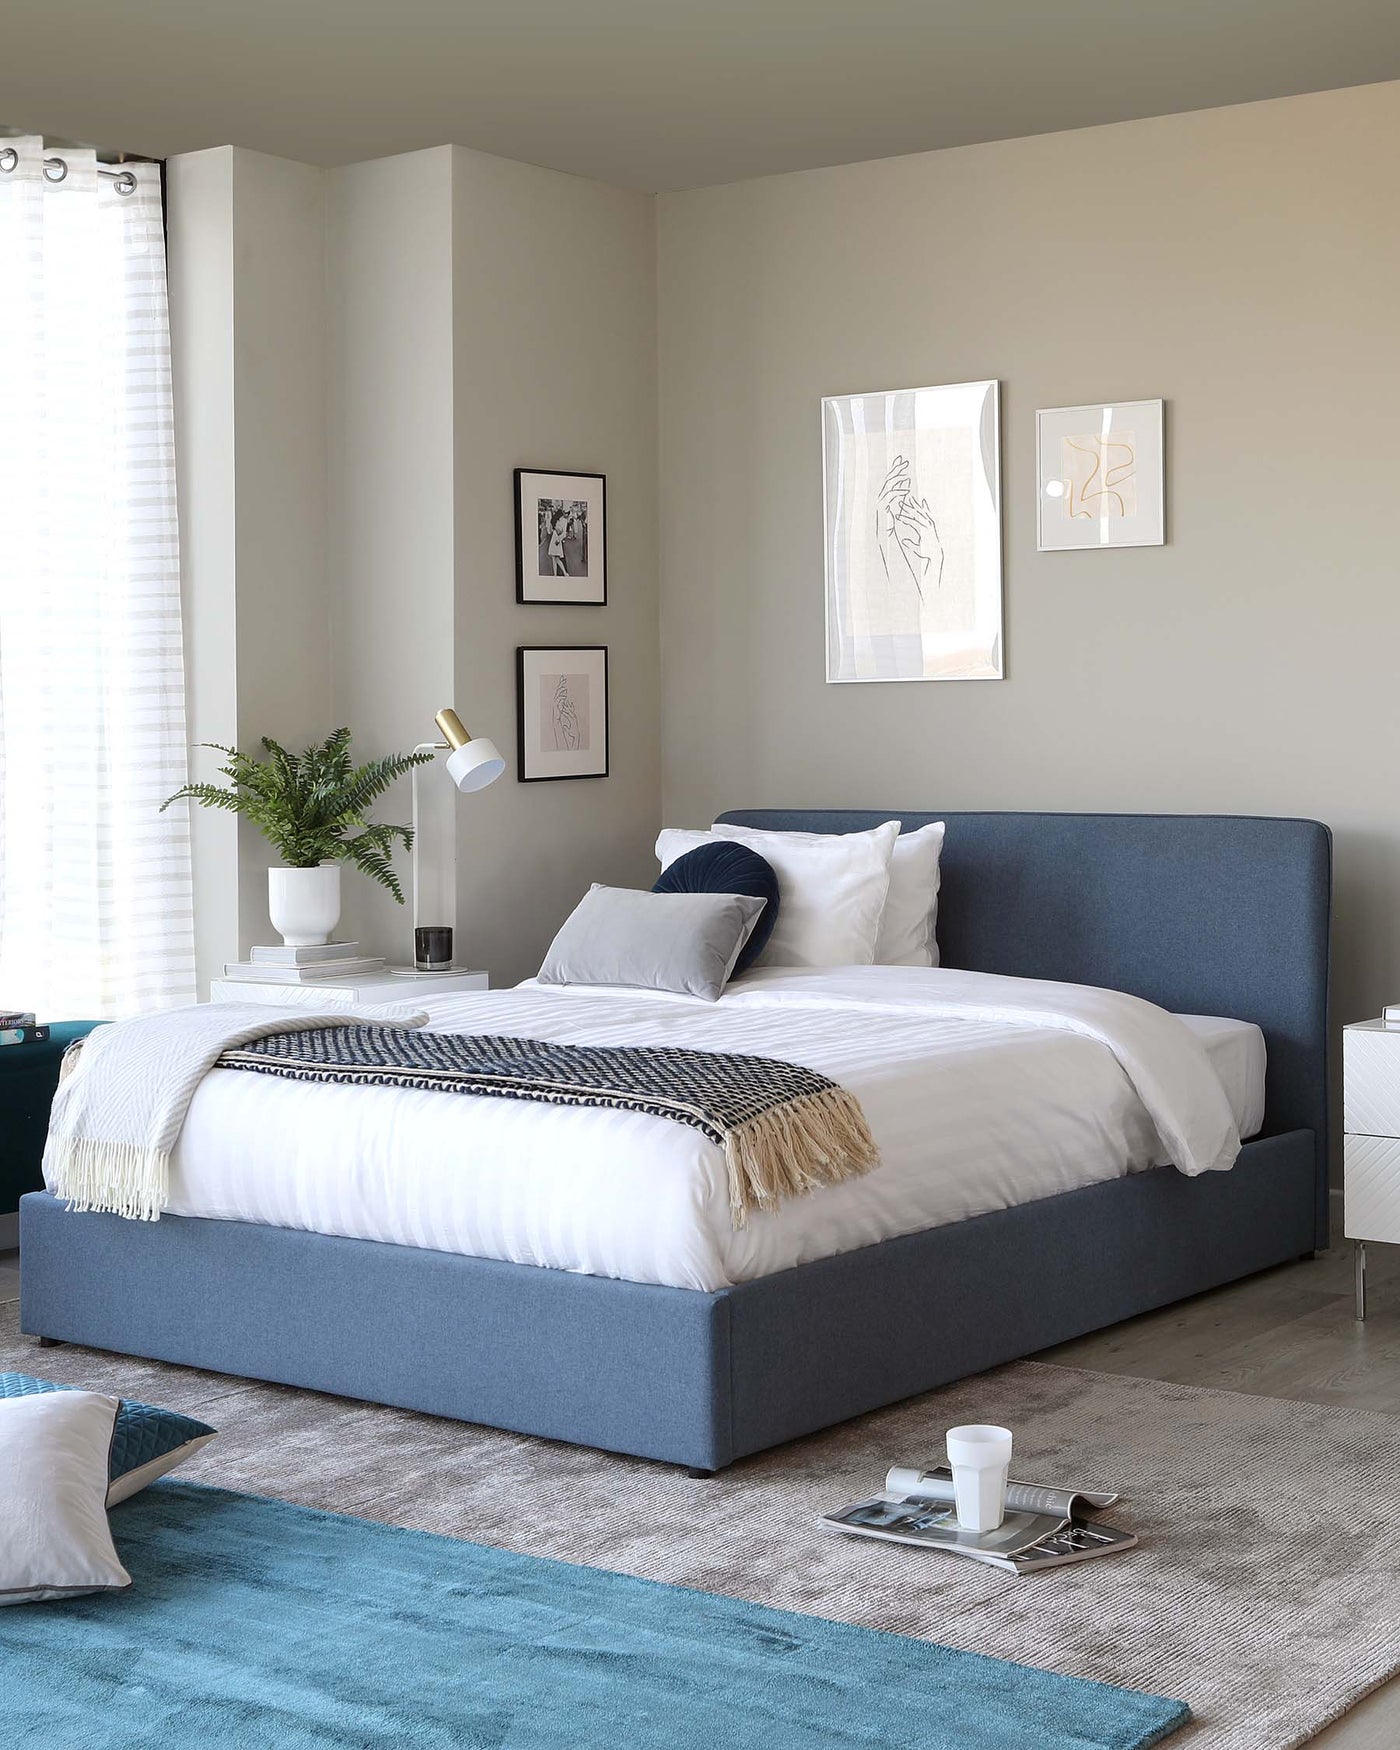 A modern bedroom setting featuring a queen-sized bed with a minimalist blue upholstered headboard and platform base. The bed is adorned with crisp white bedding, a patterned throw, and assorted pillows. A white side table with a simple design and round white lamp provides a functional accent to the space. A plush area rug in a blend of neutral and teal hues adds warmth and texture to the floor.